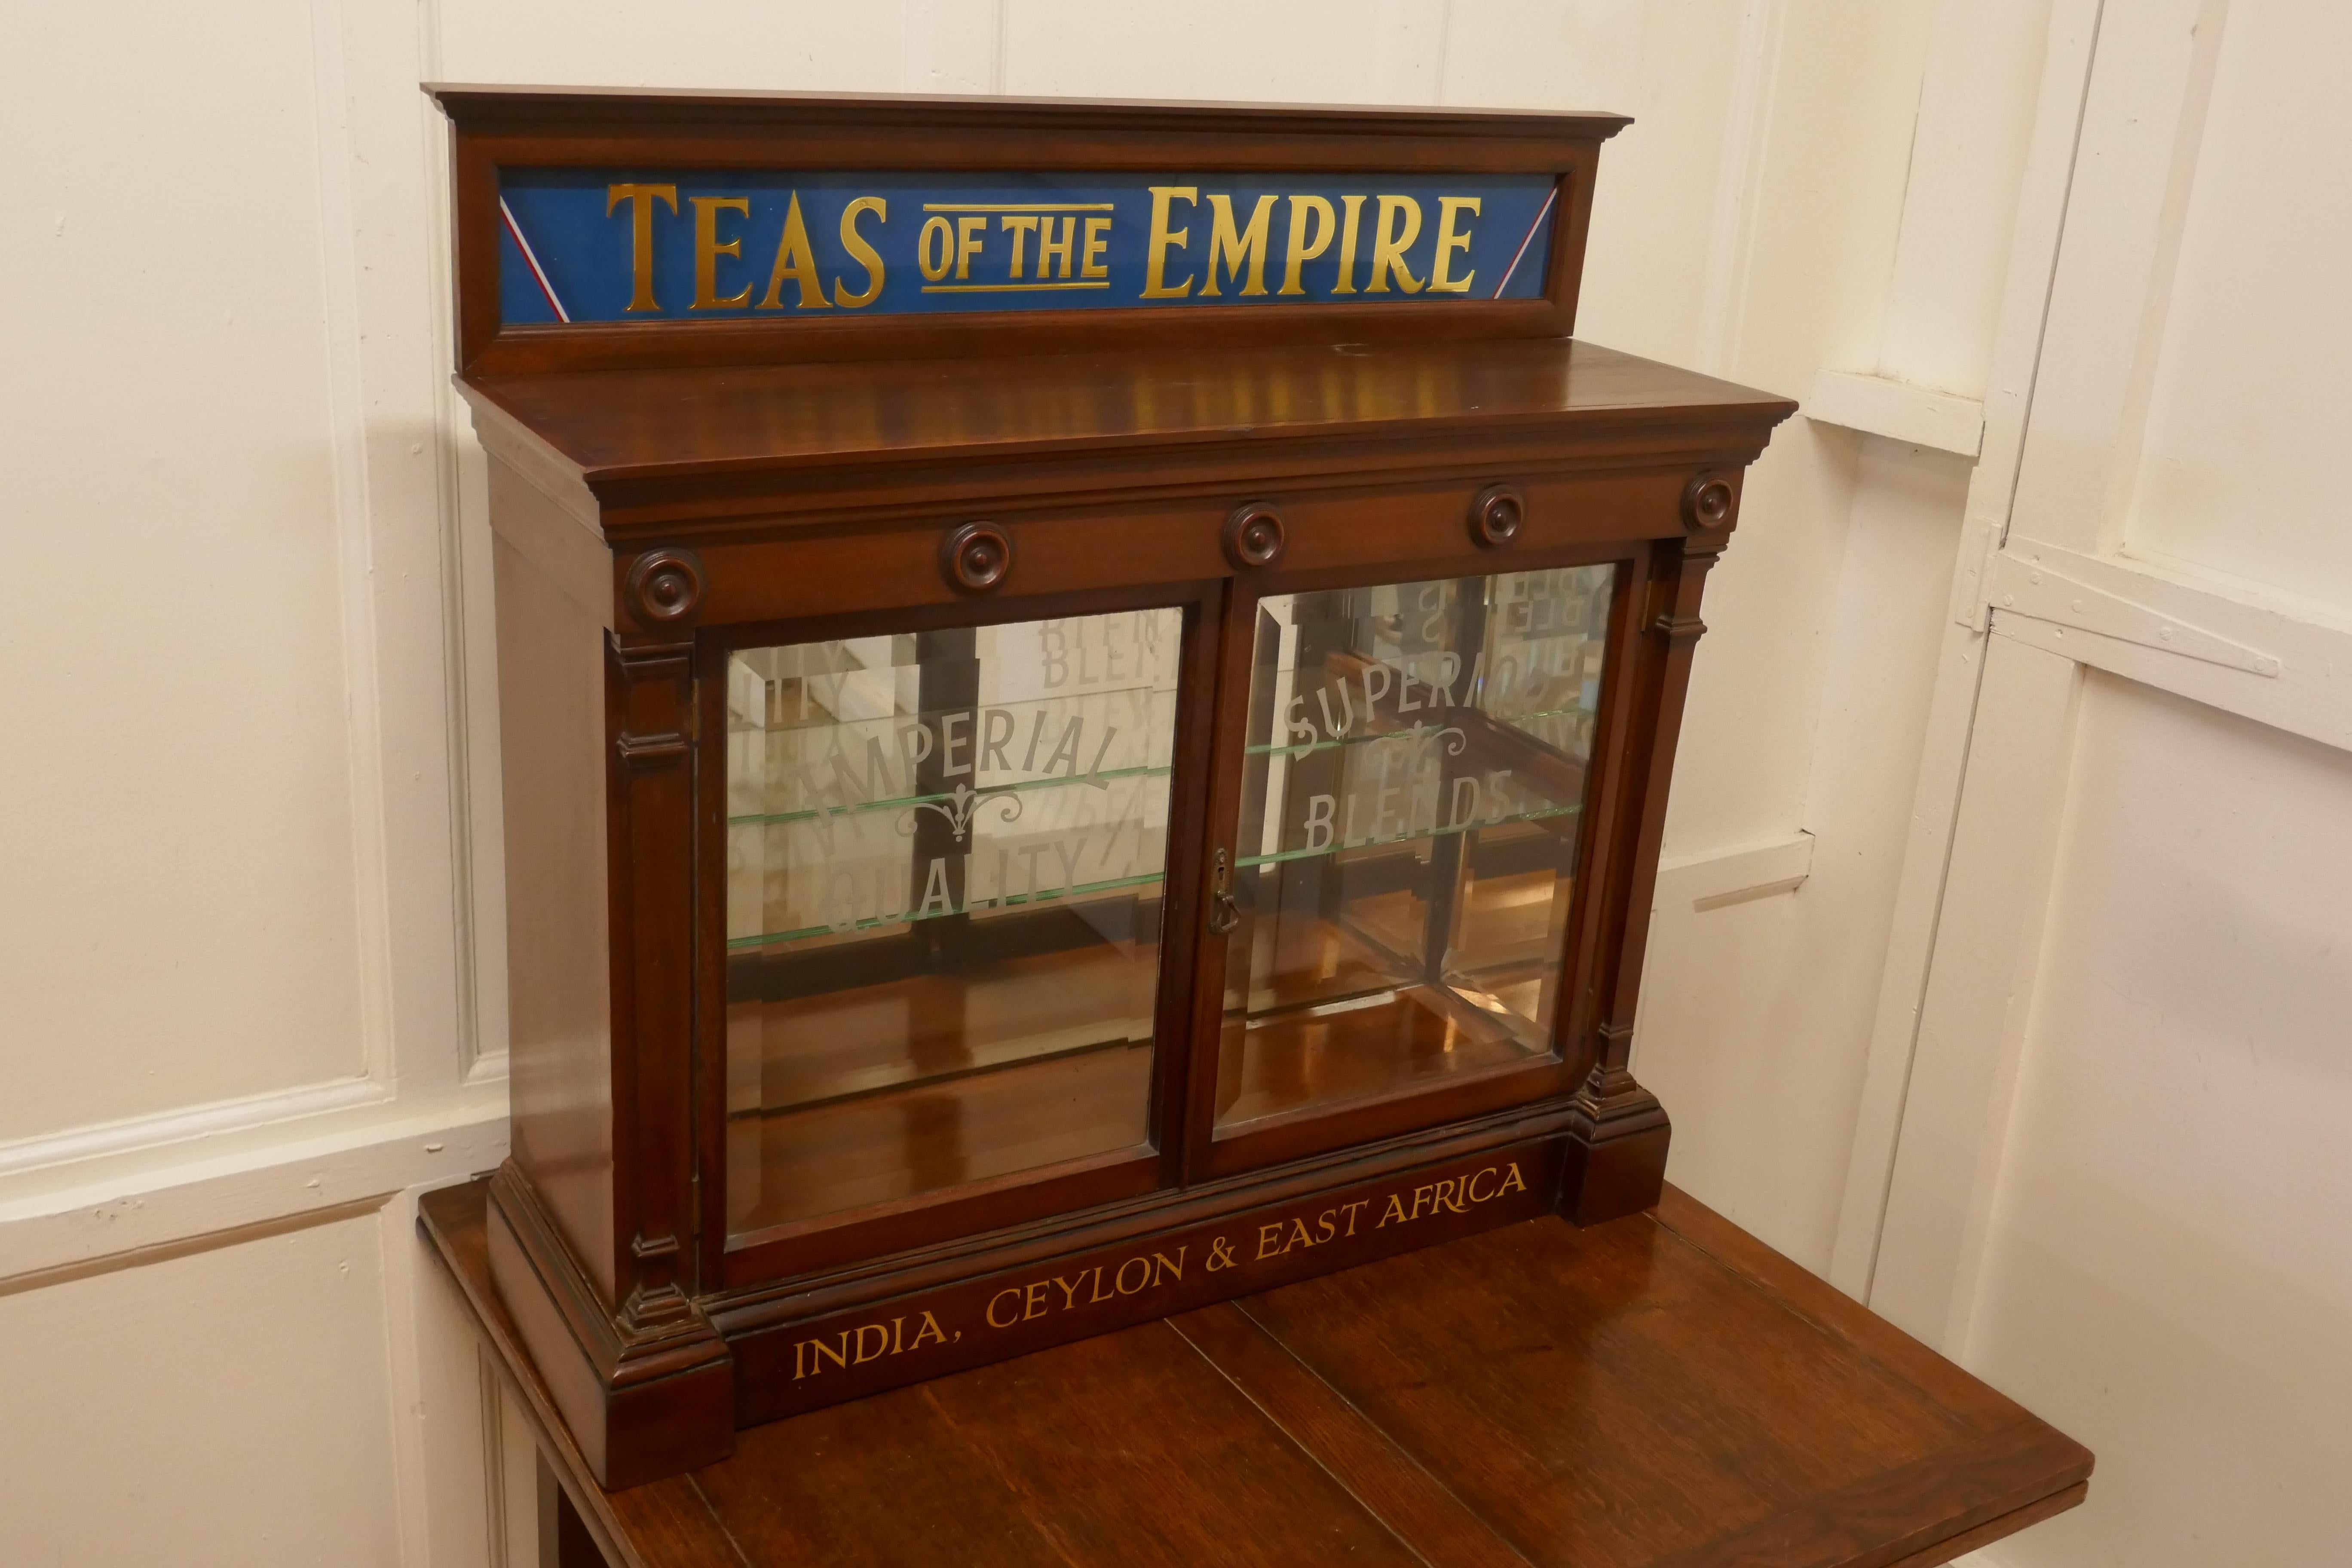 Late 19th Century  Victorian Empire Tea Cabinet, Tea Room, Cafe Display  A magnificent piece  For Sale